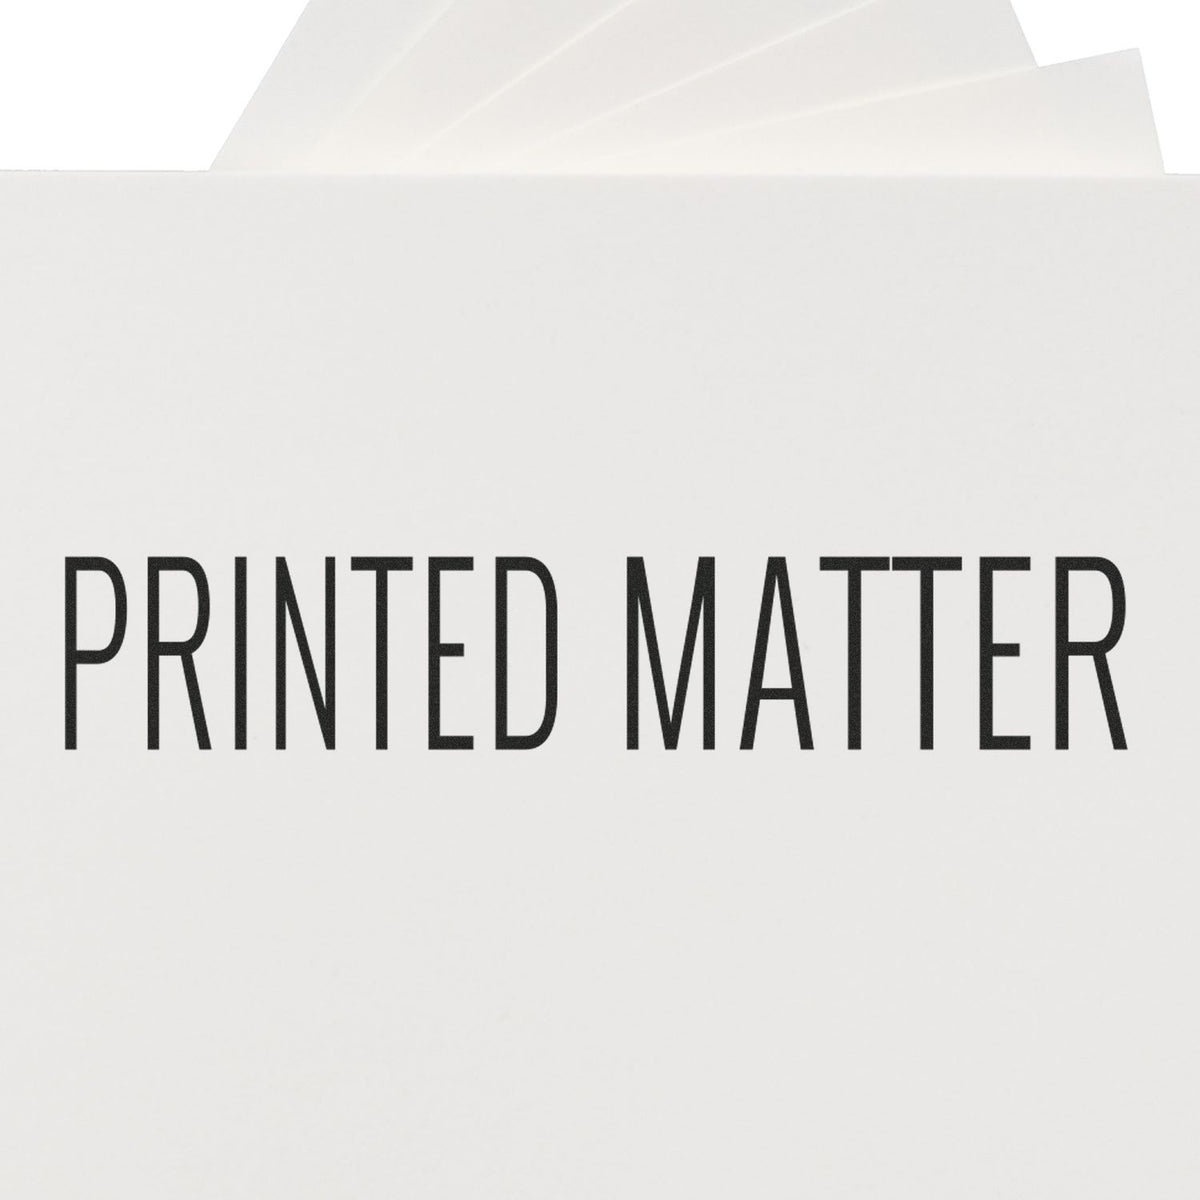 Large Printed Matter Rubber Stamp Lifestyle Photo